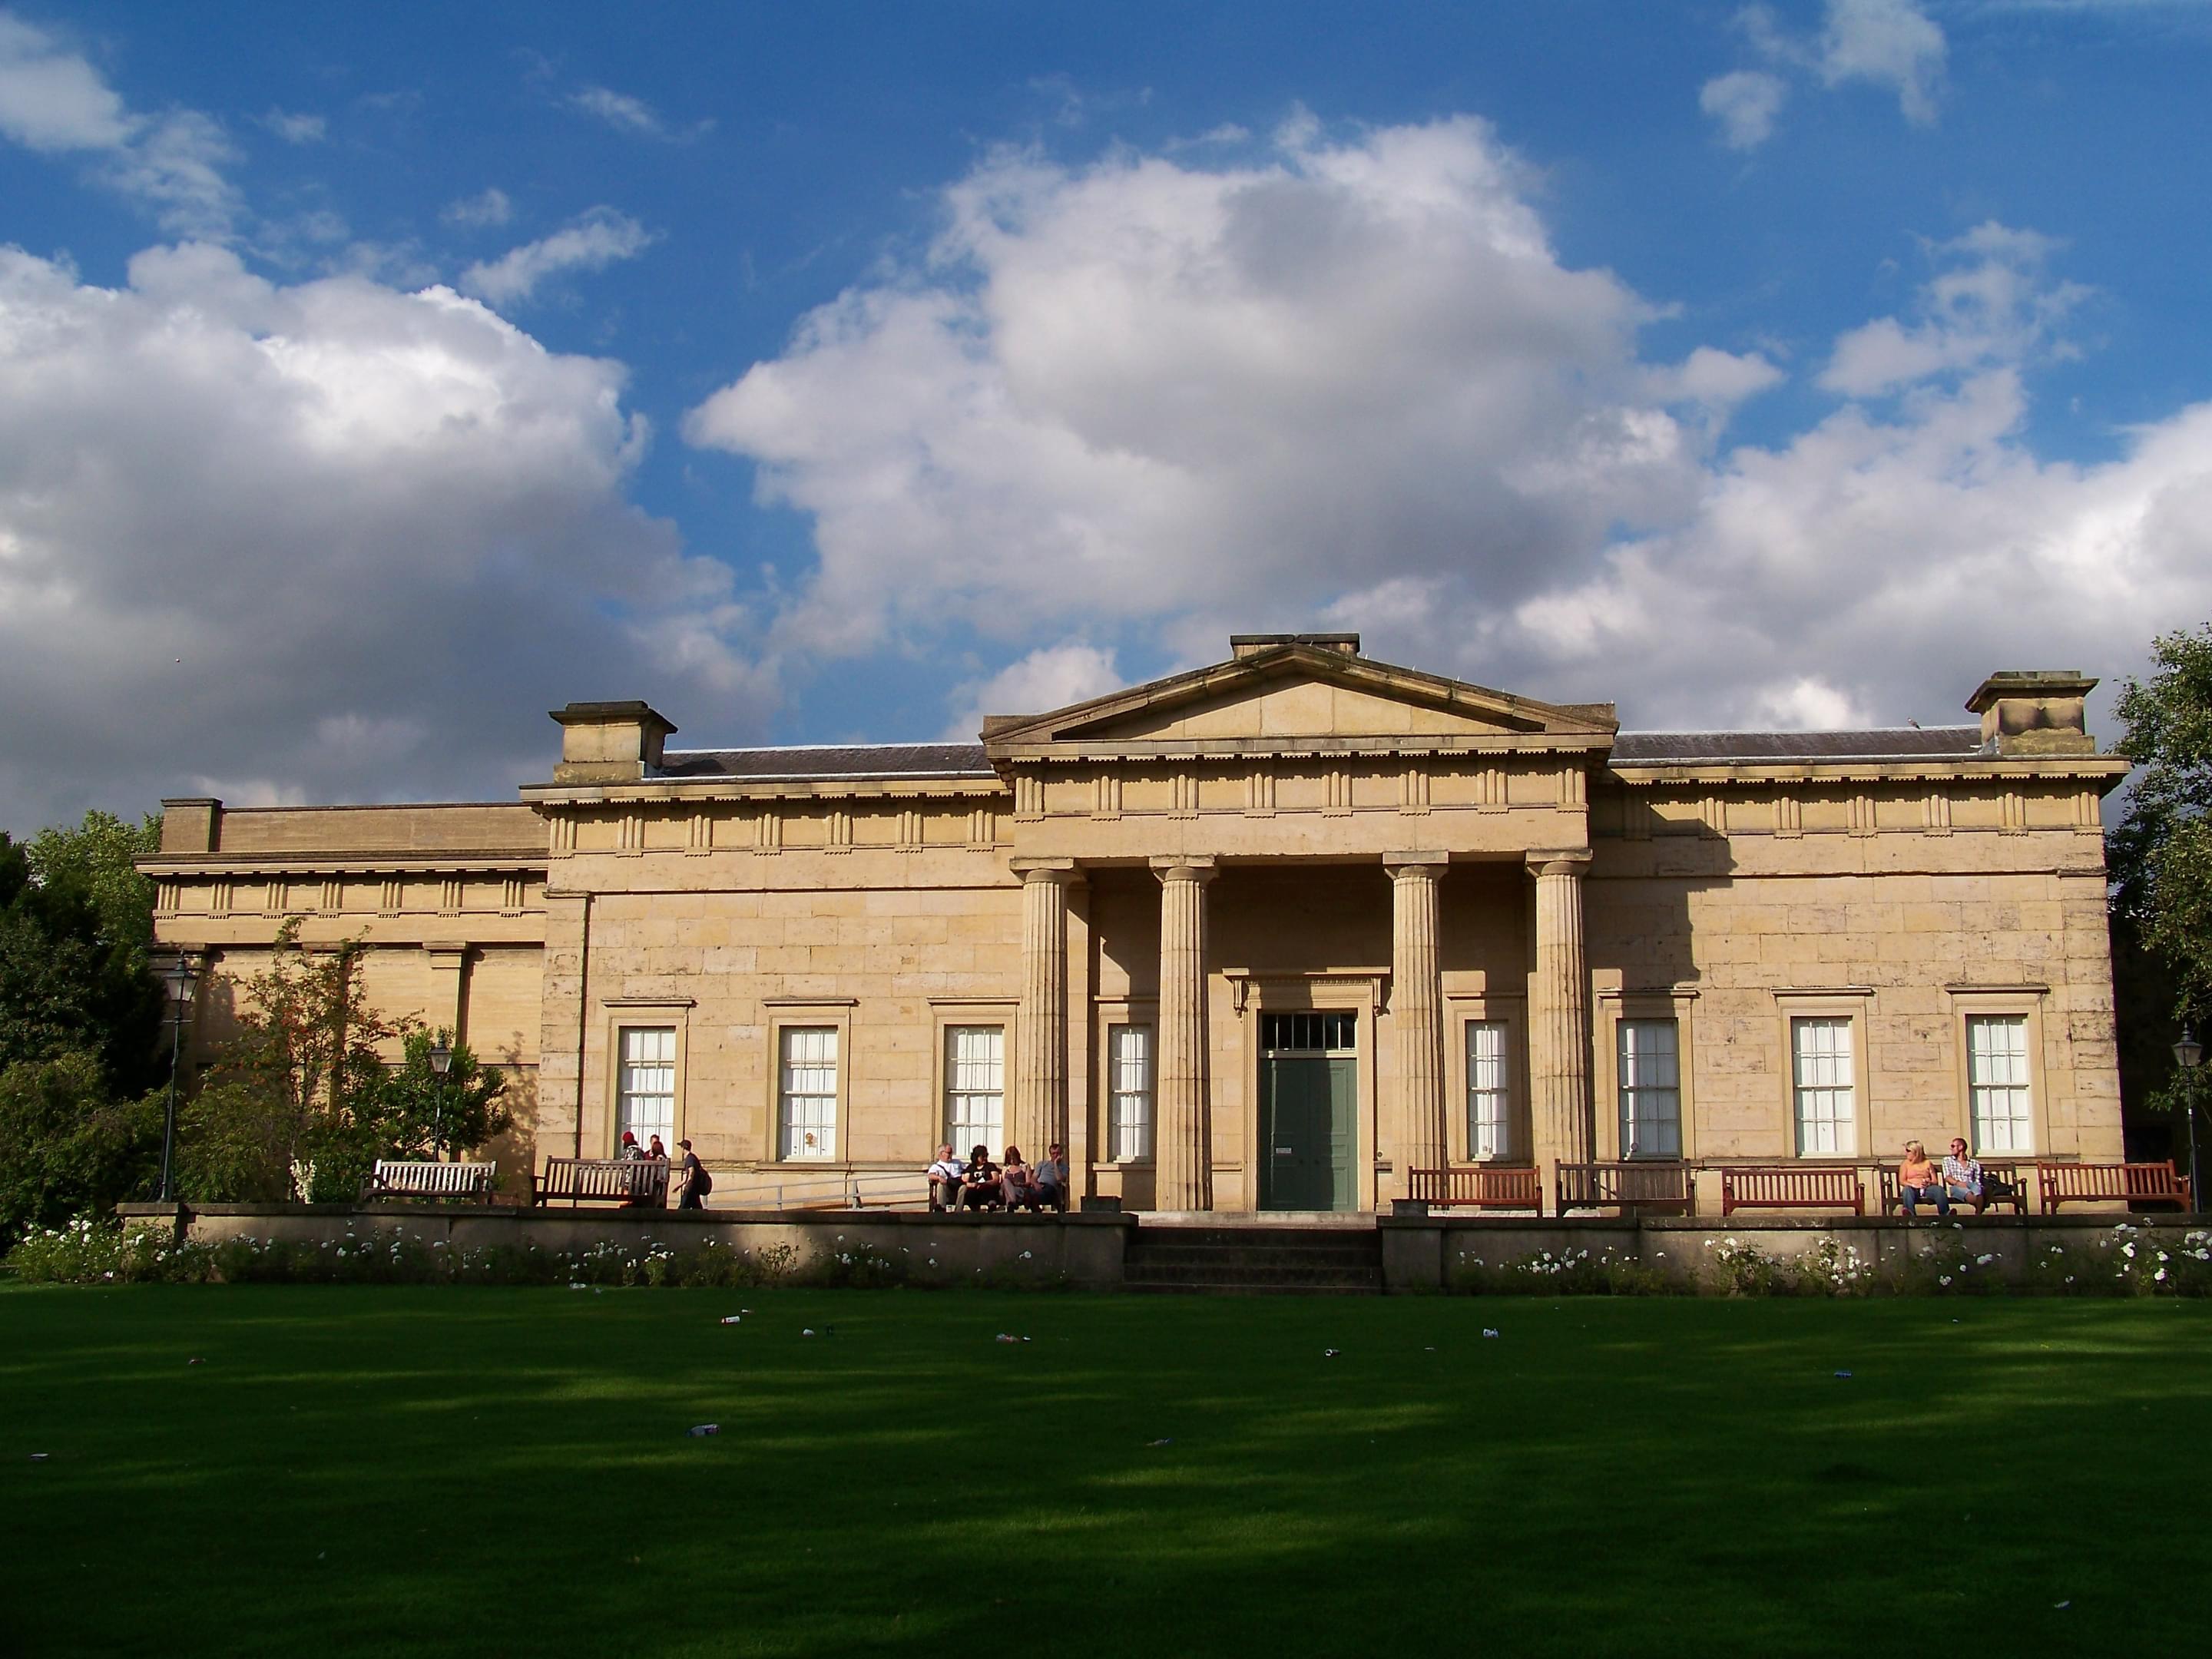 Yorkshire Museum and Gardens Overview